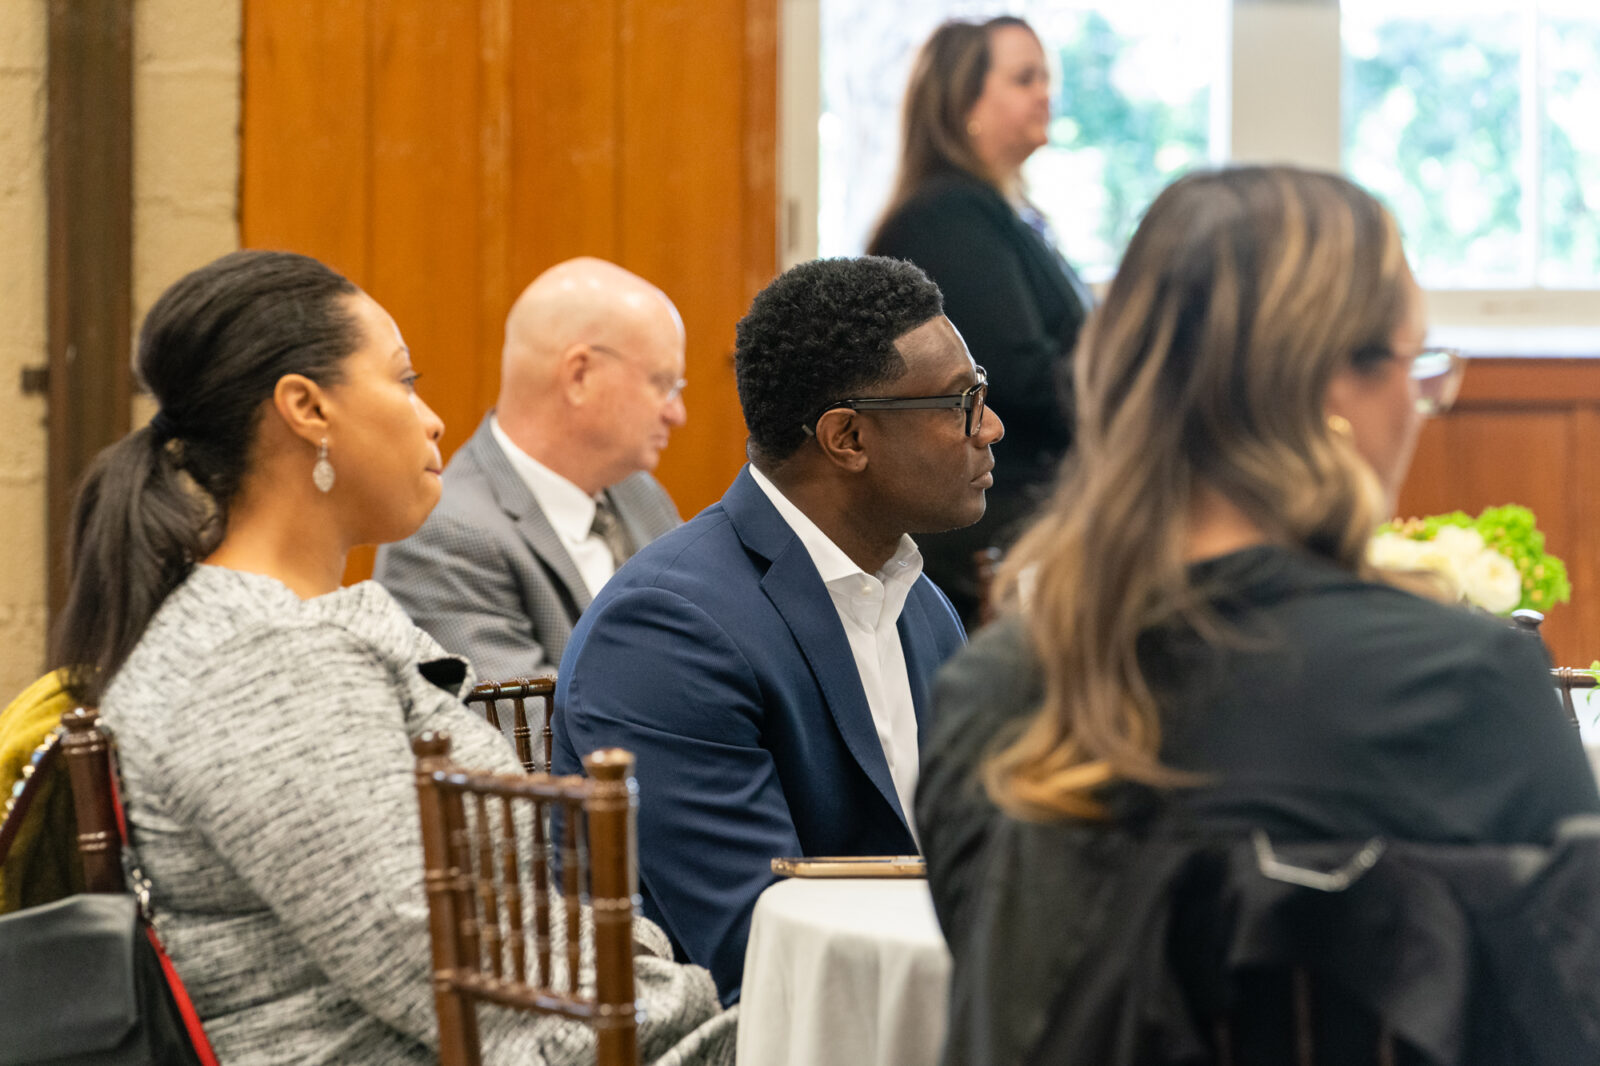 Jessica Brooks, center, and Marlin Brooks, during Advancing Ambition, a live event with panel discussions focused on cybersecurity, and the need for more job training in this area, at Piedmont Park, on Tuesday, Oct. 18.